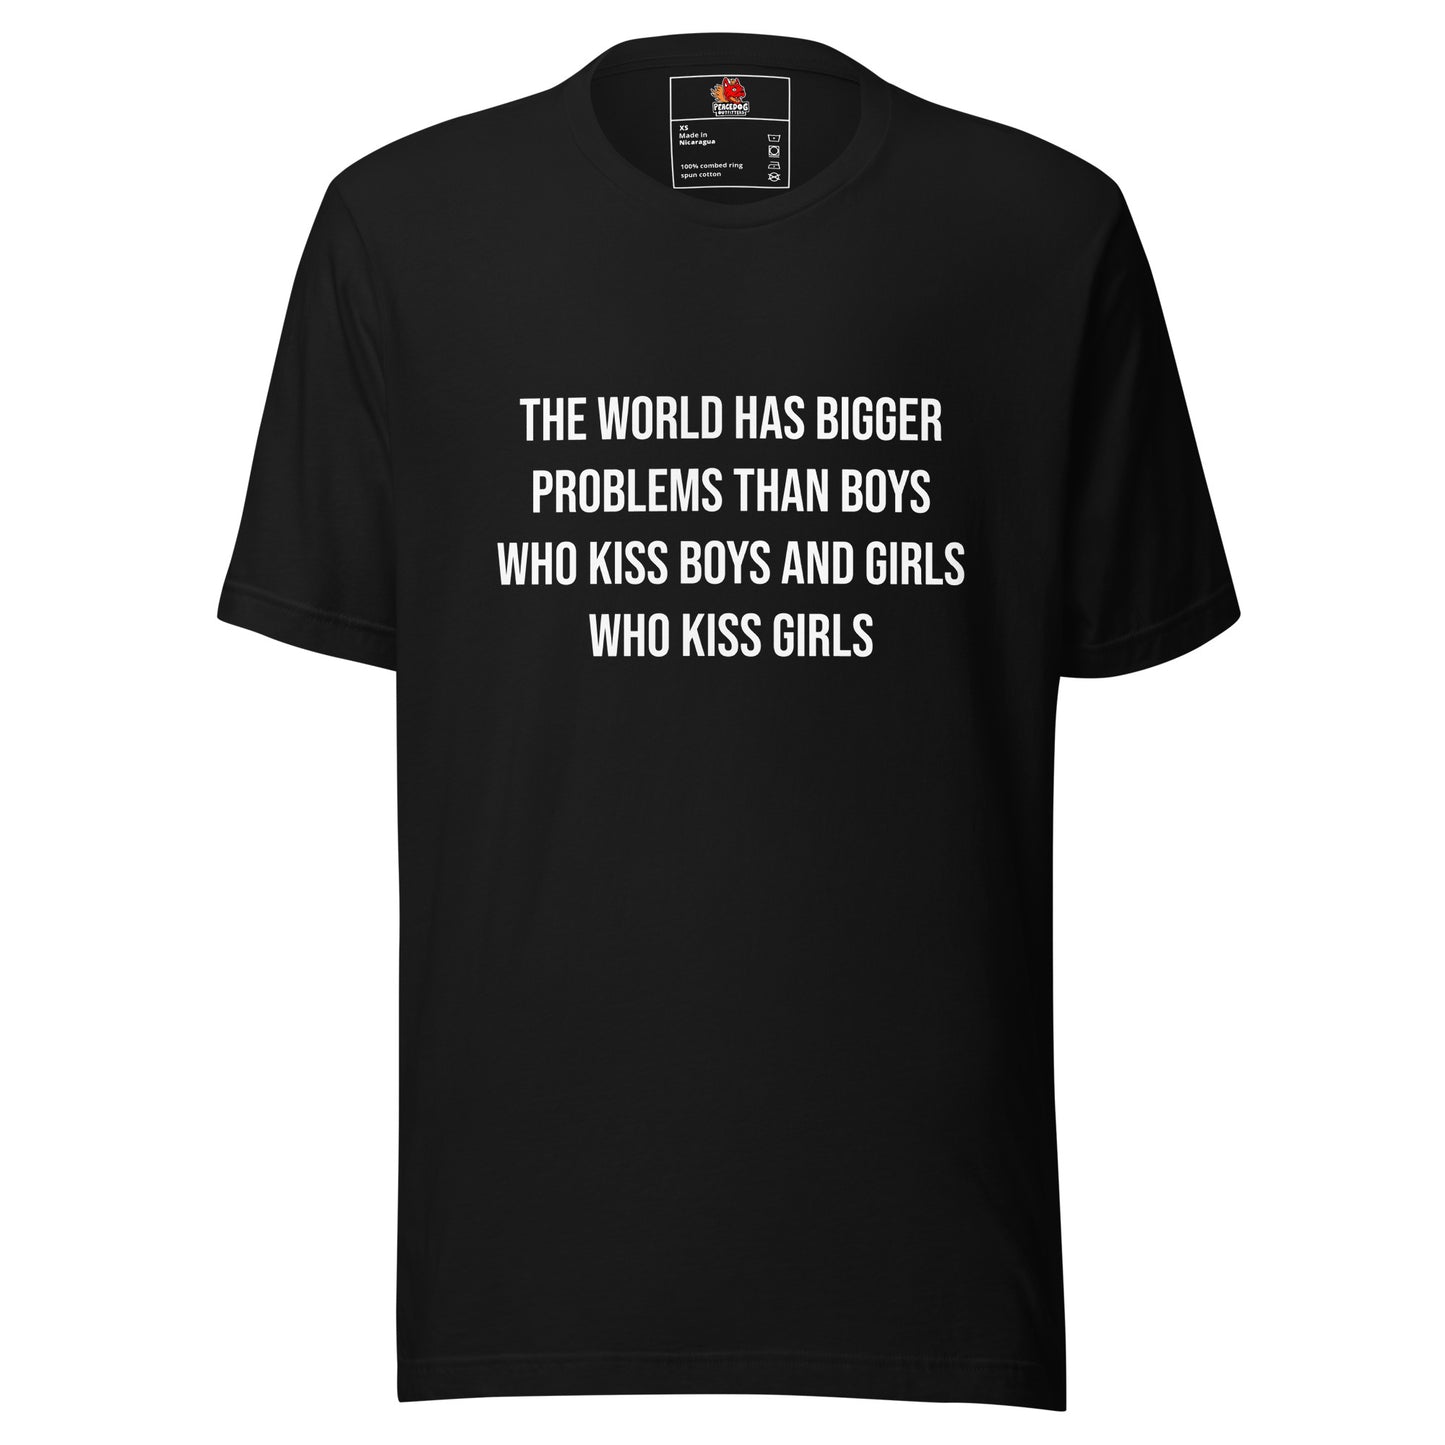 The World Has Bigger Problems... T-shirt